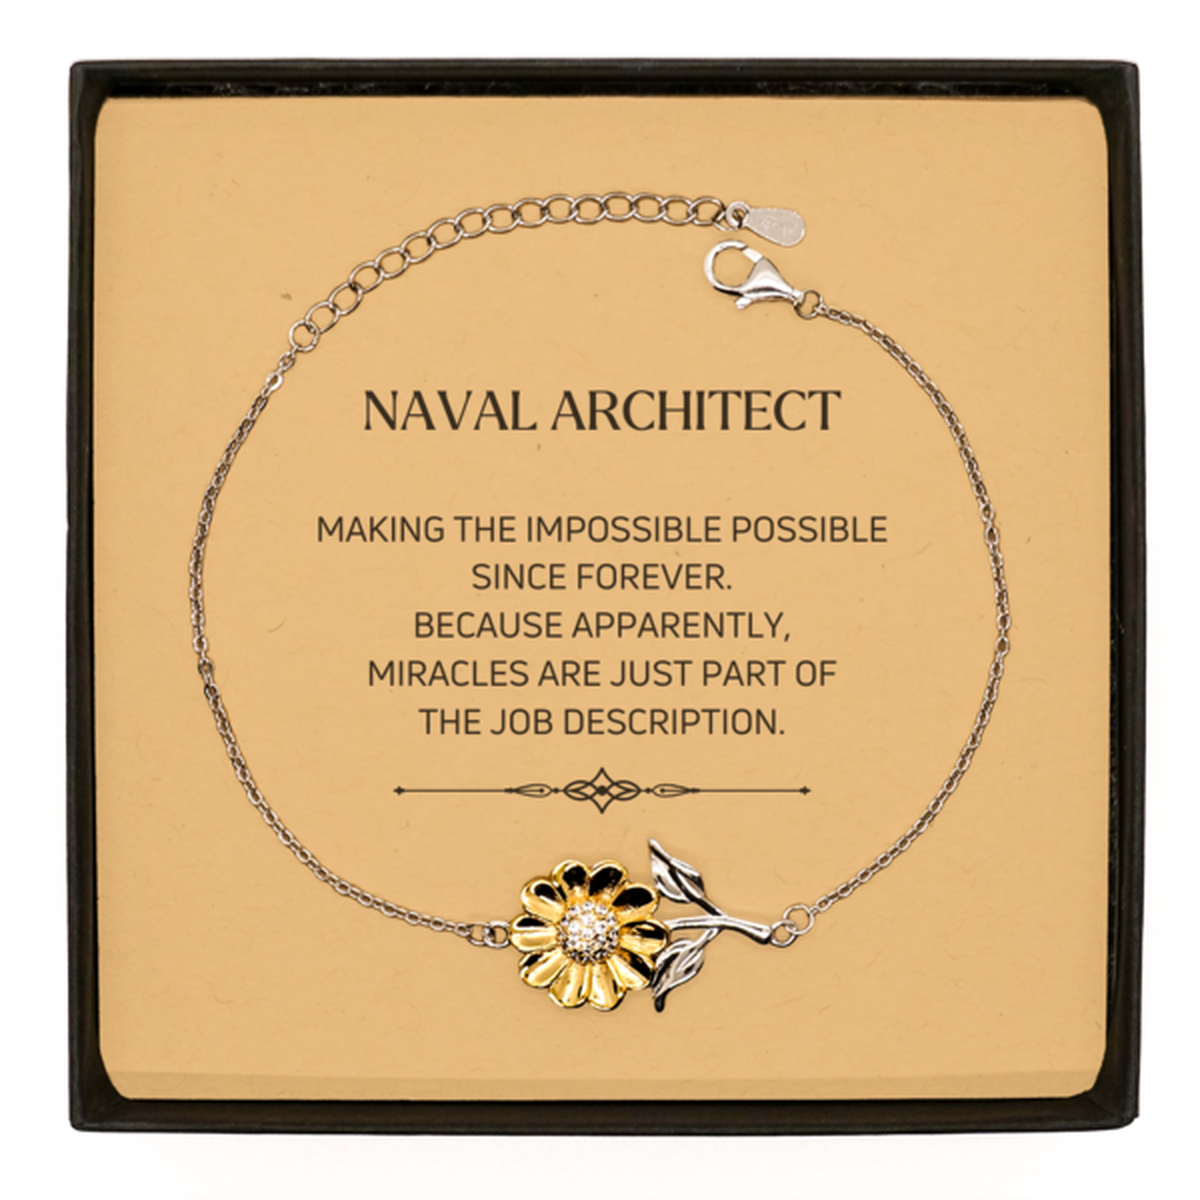 Funny Naval Architect Gifts, Miracles are just part of the job description, Inspirational Birthday Sunflower Bracelet For Naval Architect, Men, Women, Coworkers, Friends, Boss